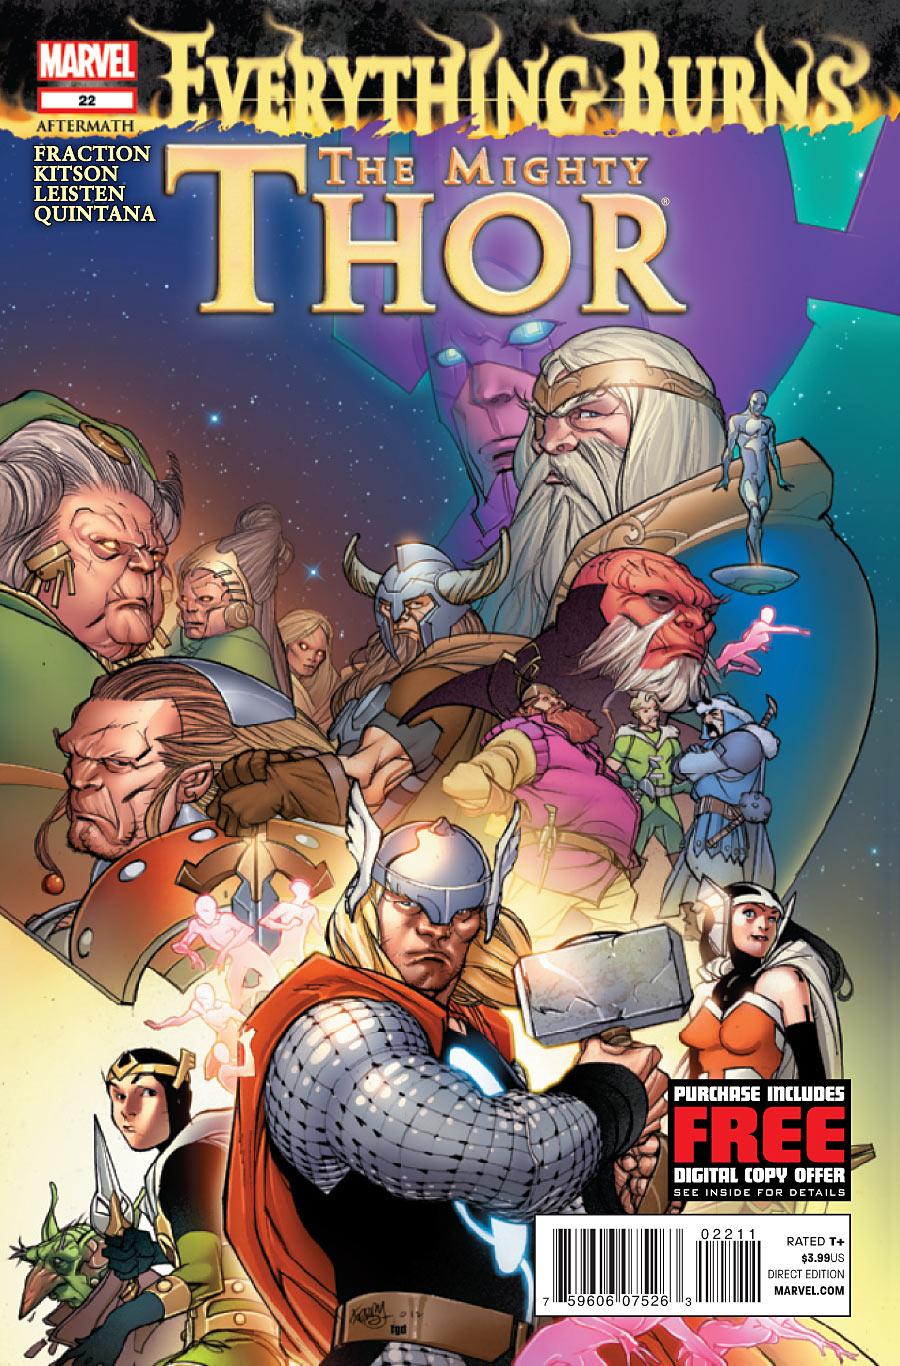 The Mighty Thor Vol. 1 #22